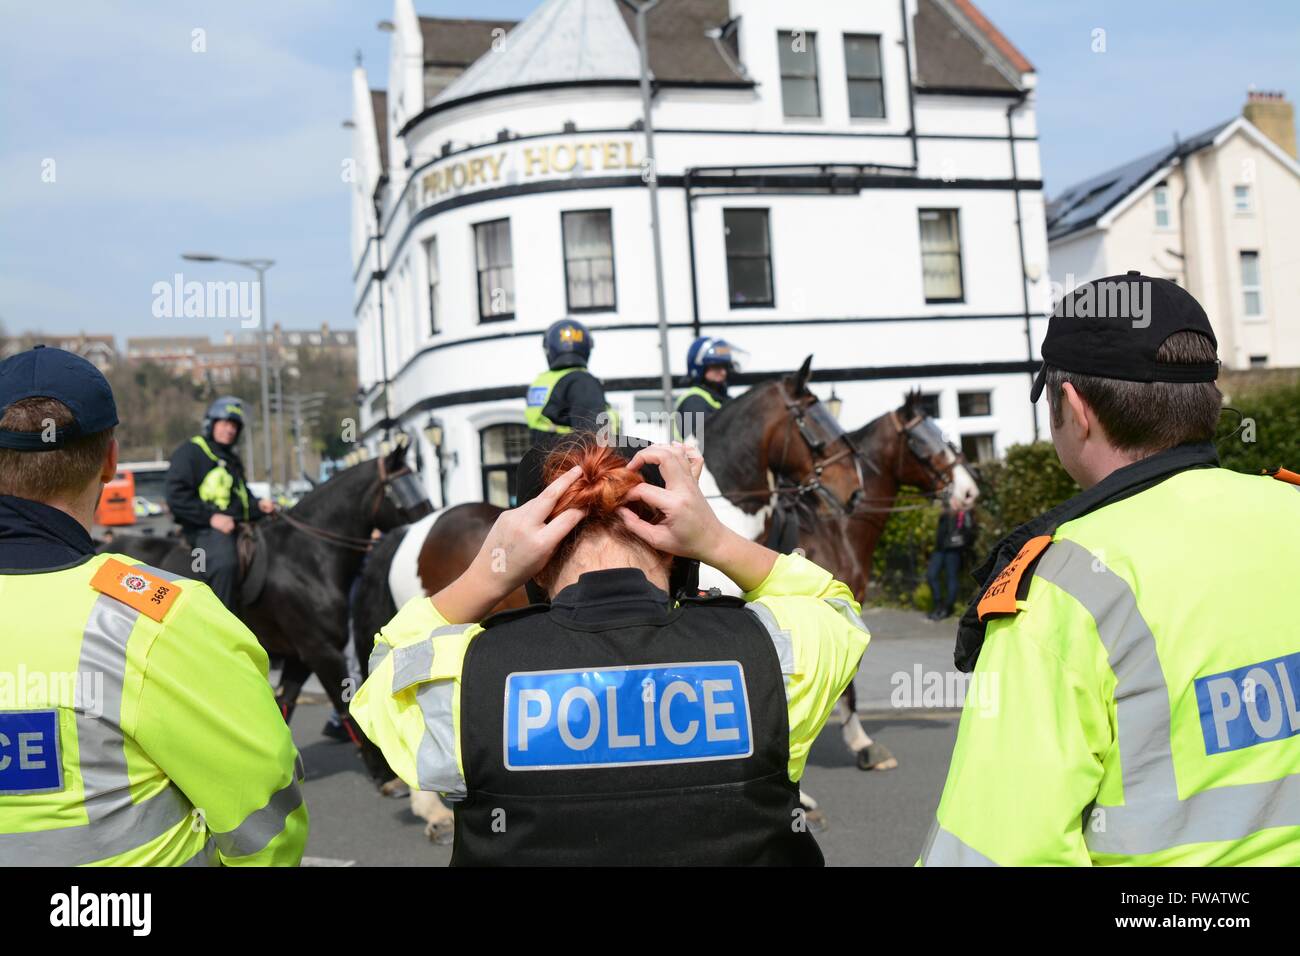 Dover, UK. 2nd April 2016. Clashes As Pro and Anti-refugee groups clash in Dover.  Police officer corrects her hair as mounted units march past. Credit: Marc Ward/Alamy Live News Stock Photo